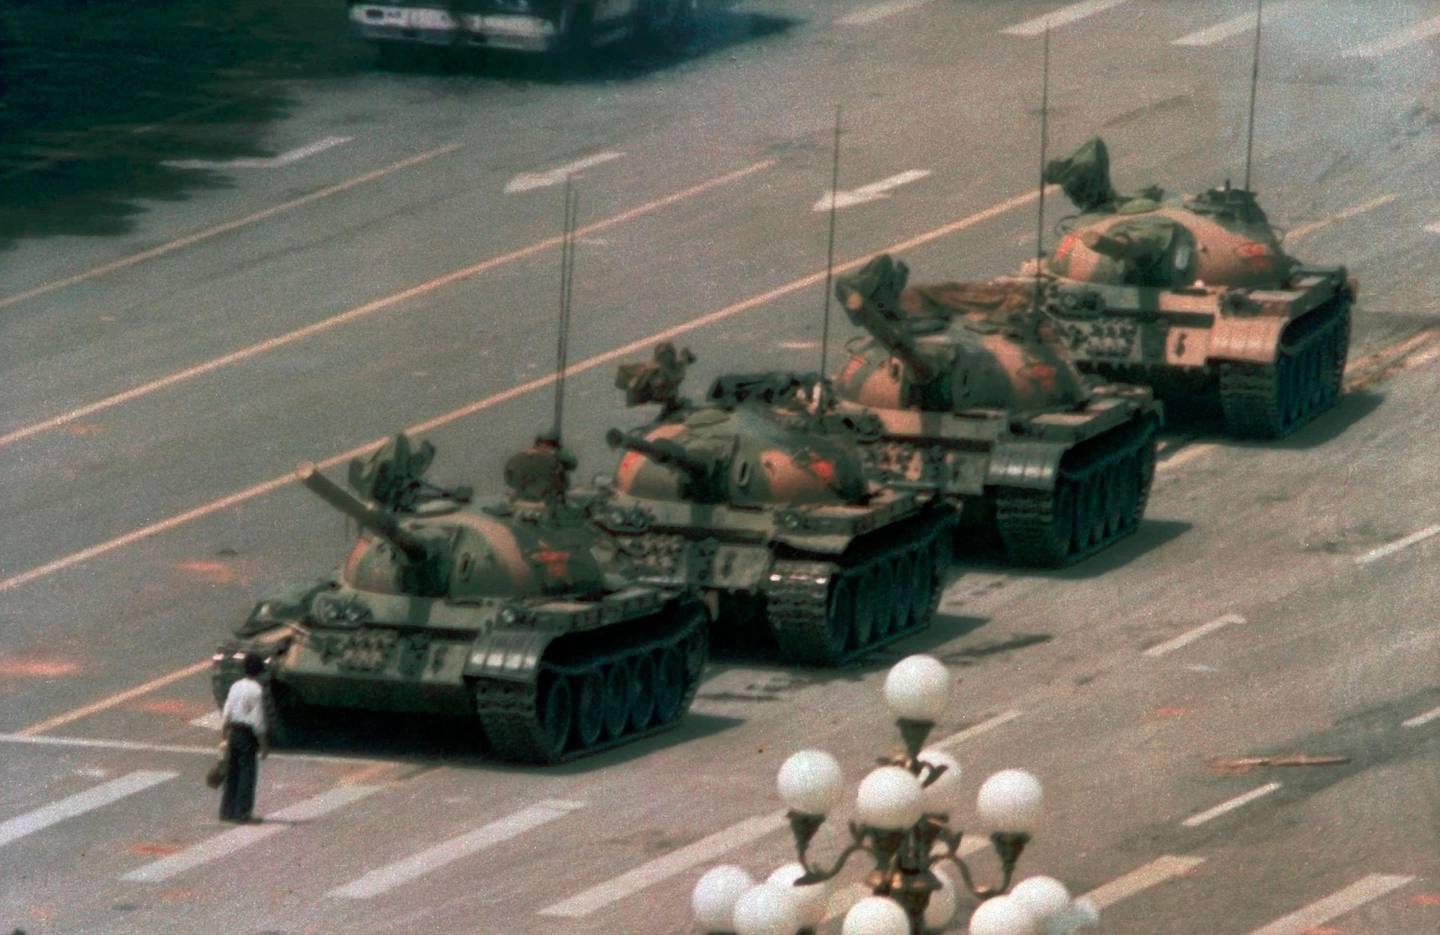 FILE - In this June 5, 1989 file photo, a Chinese man stands alone to block a line of tanks heading east on Beijing's Changan Blvd. in Tiananmen Square. The man, calling for an end to the recent violence and bloodshed against pro-democracy demonstrators, was pulled away by bystanders, and the tanks continued on their way. Over seven weeks in 1989, student-led pro-democracy protests centered on BeijingÄôs Tiananmen Square became ChinaÄôs greatest political upheaval since the end of the Cultural Revolution more than a decade earlier.(AP Photo/Jeff Widener, File )